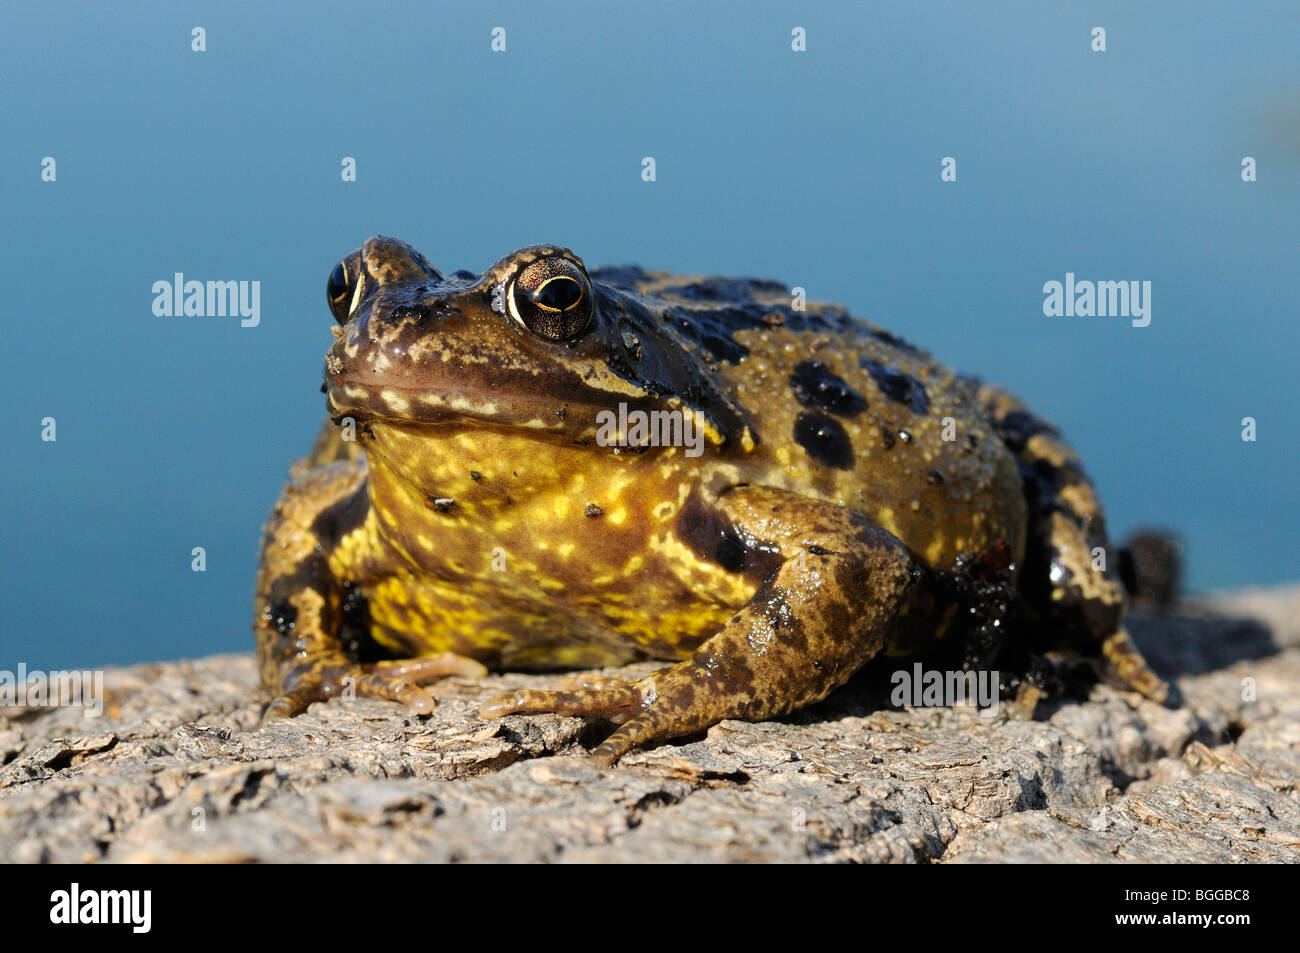 Grenouille Rousse (Rana temporaria) sitting on tree stump, Oxfordshire, UK. Banque D'Images